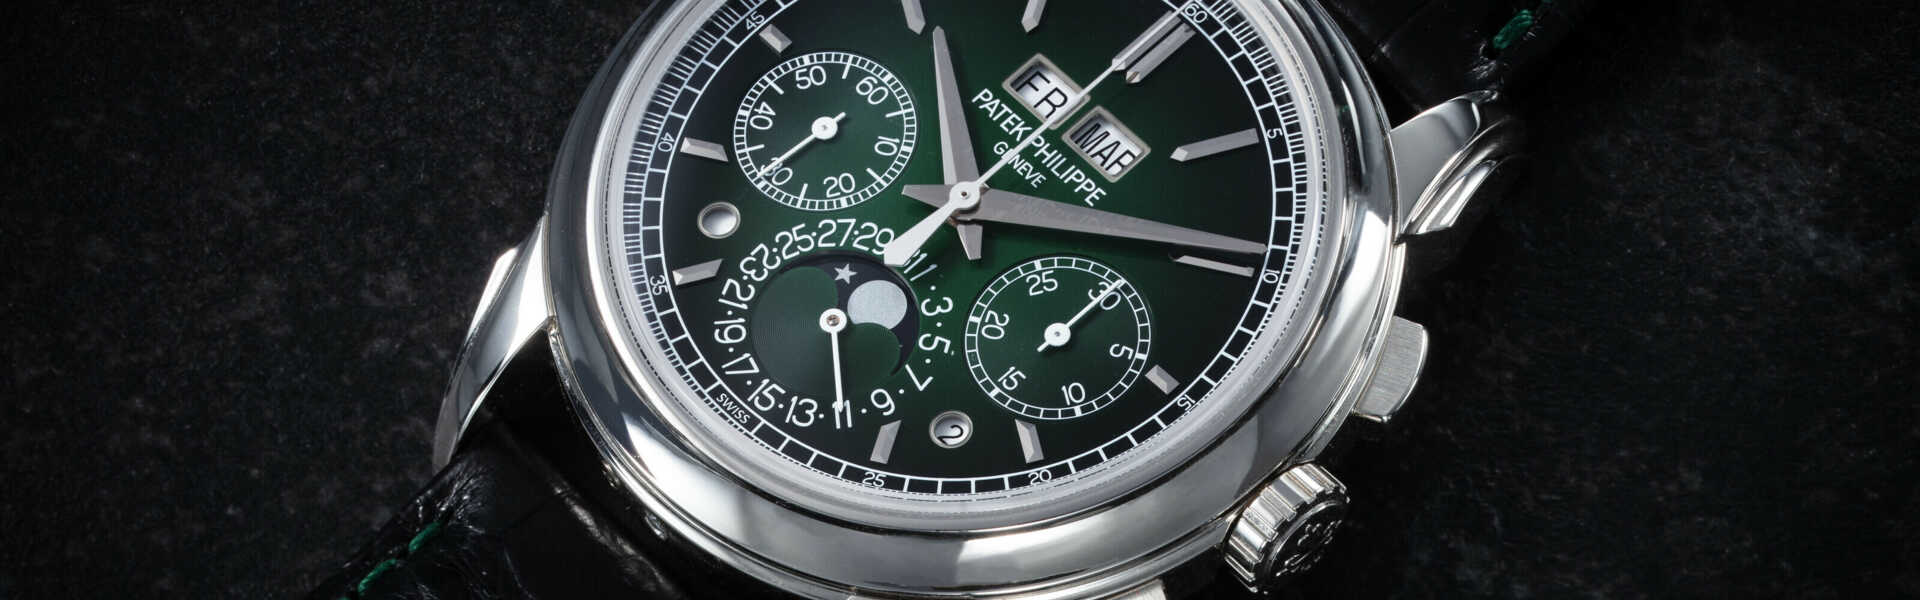 PATEK PHILIPPE, REF. 5270P-014, A RARE AND ATTRACTIVE PERPETUAL CALENDAR CHRONOGRAPH WRISTWATCH